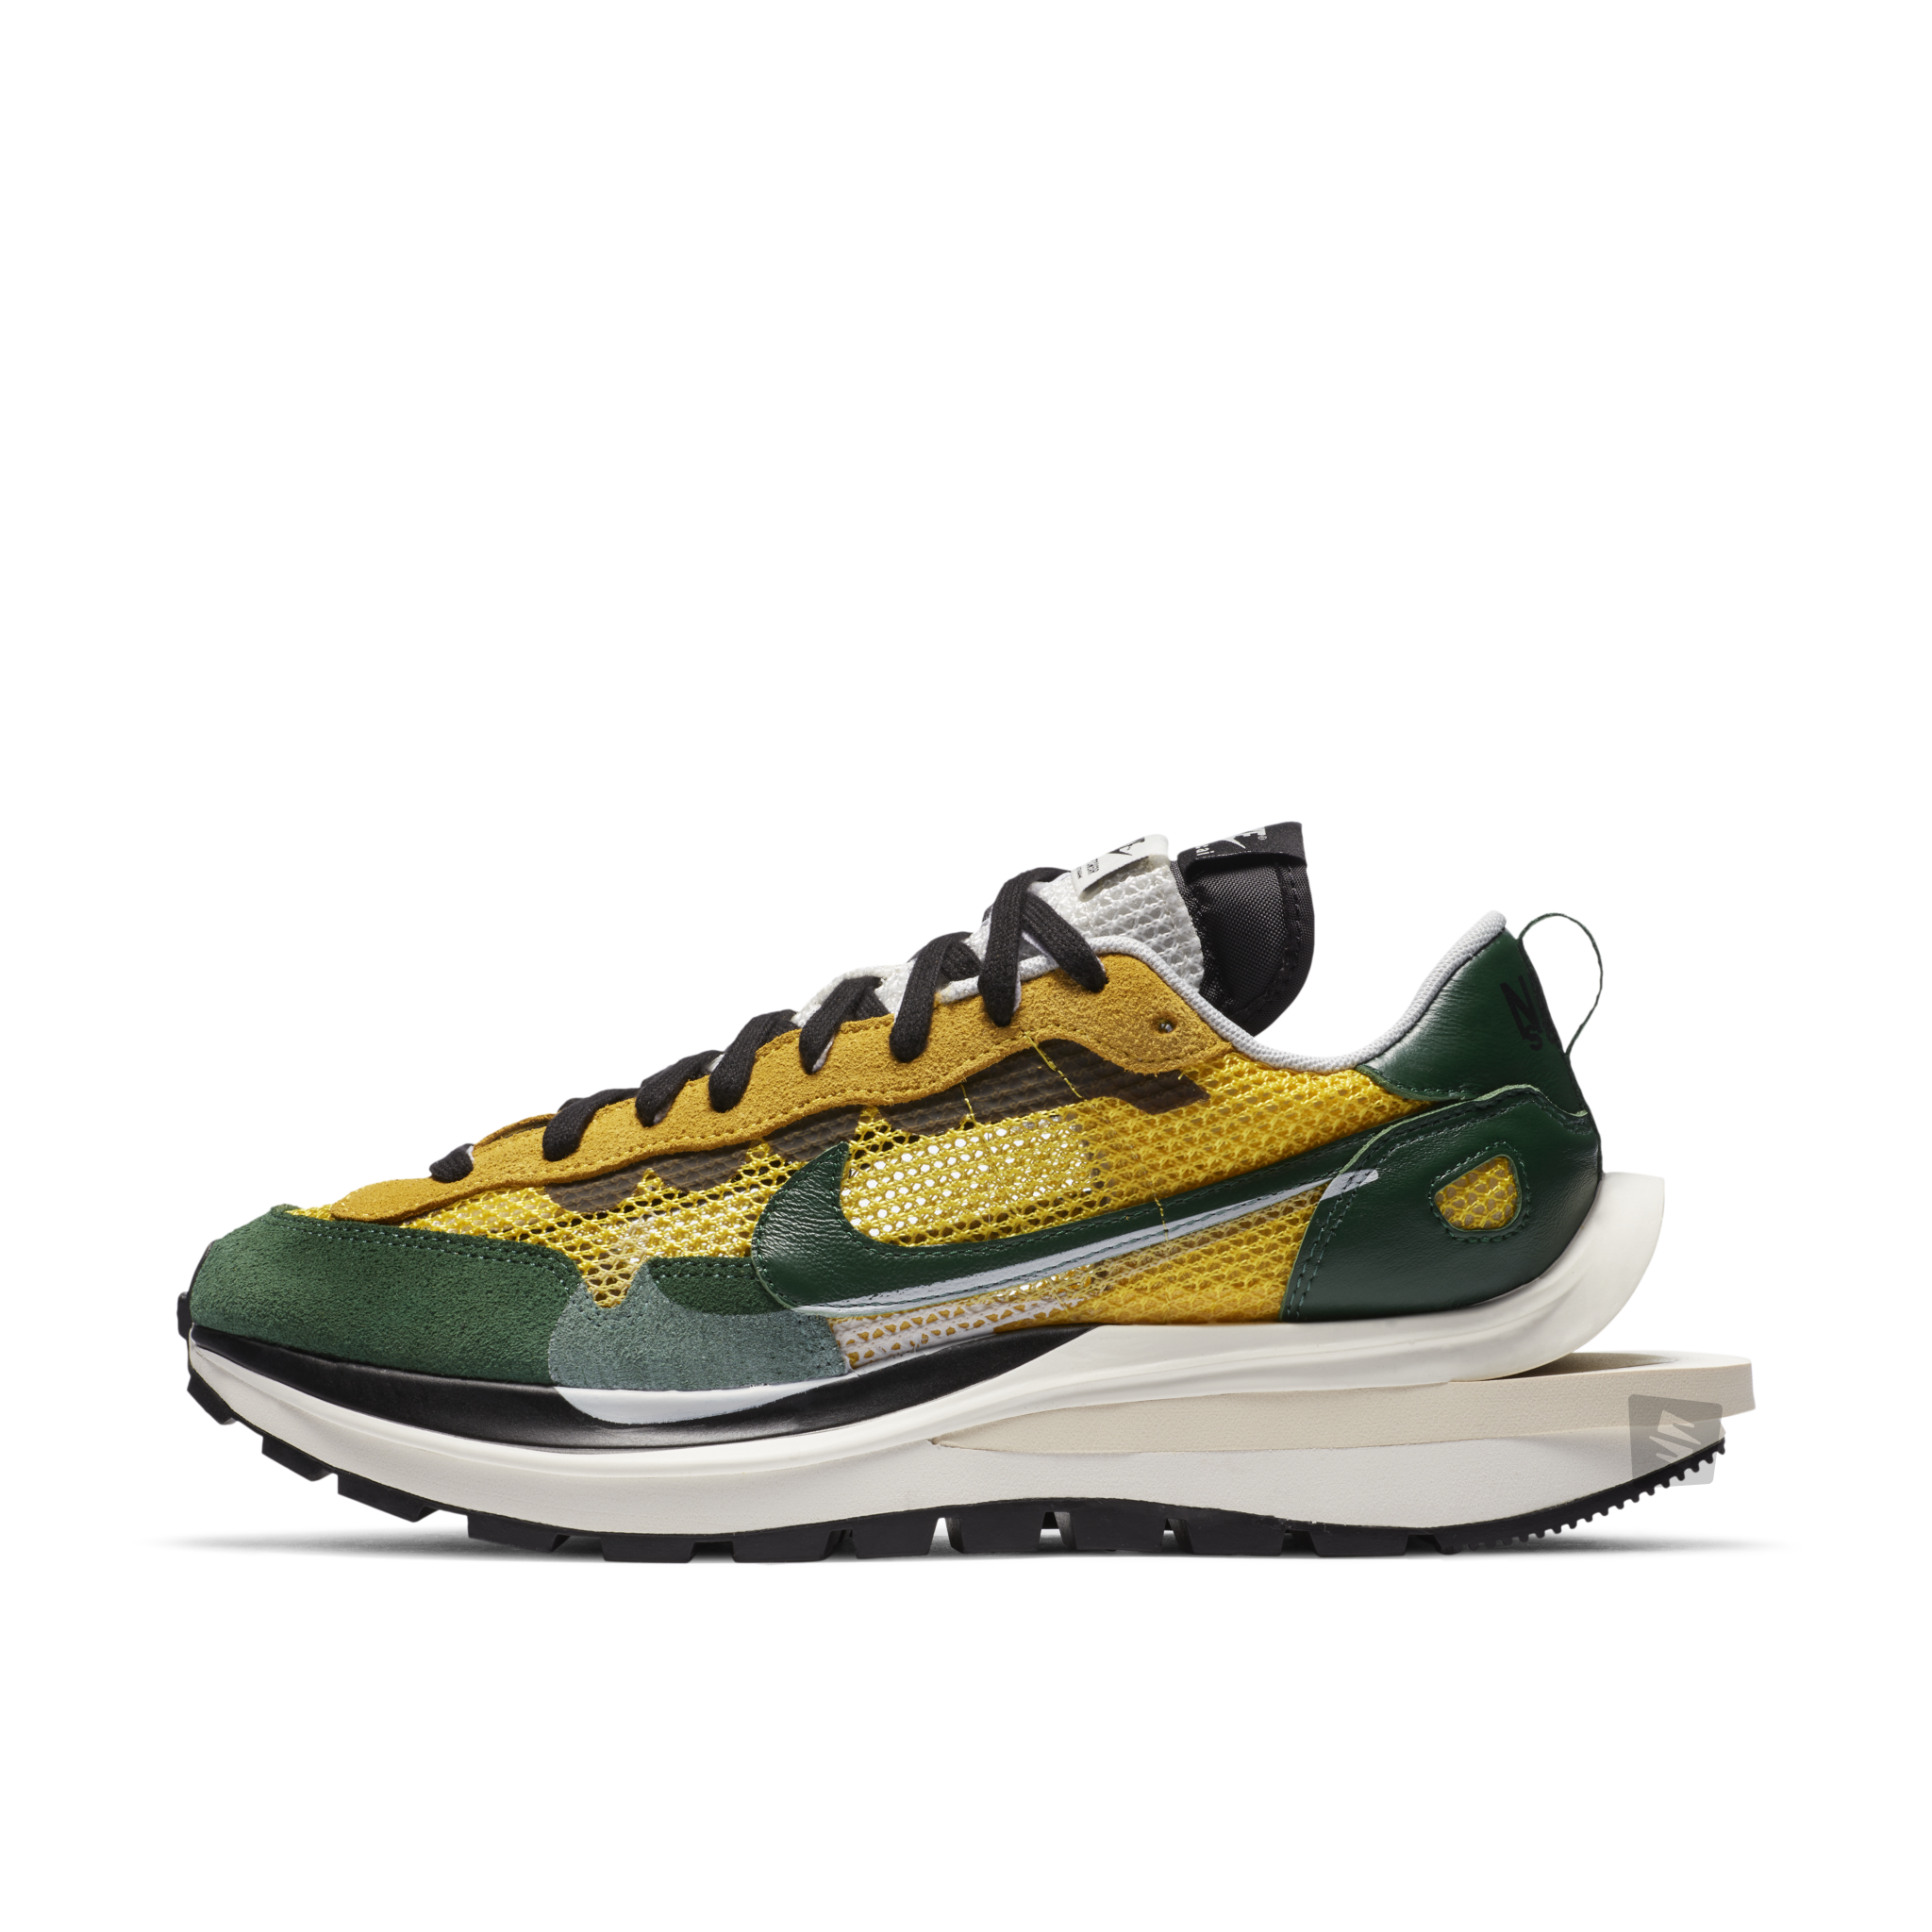 nike green and yellow sneakers